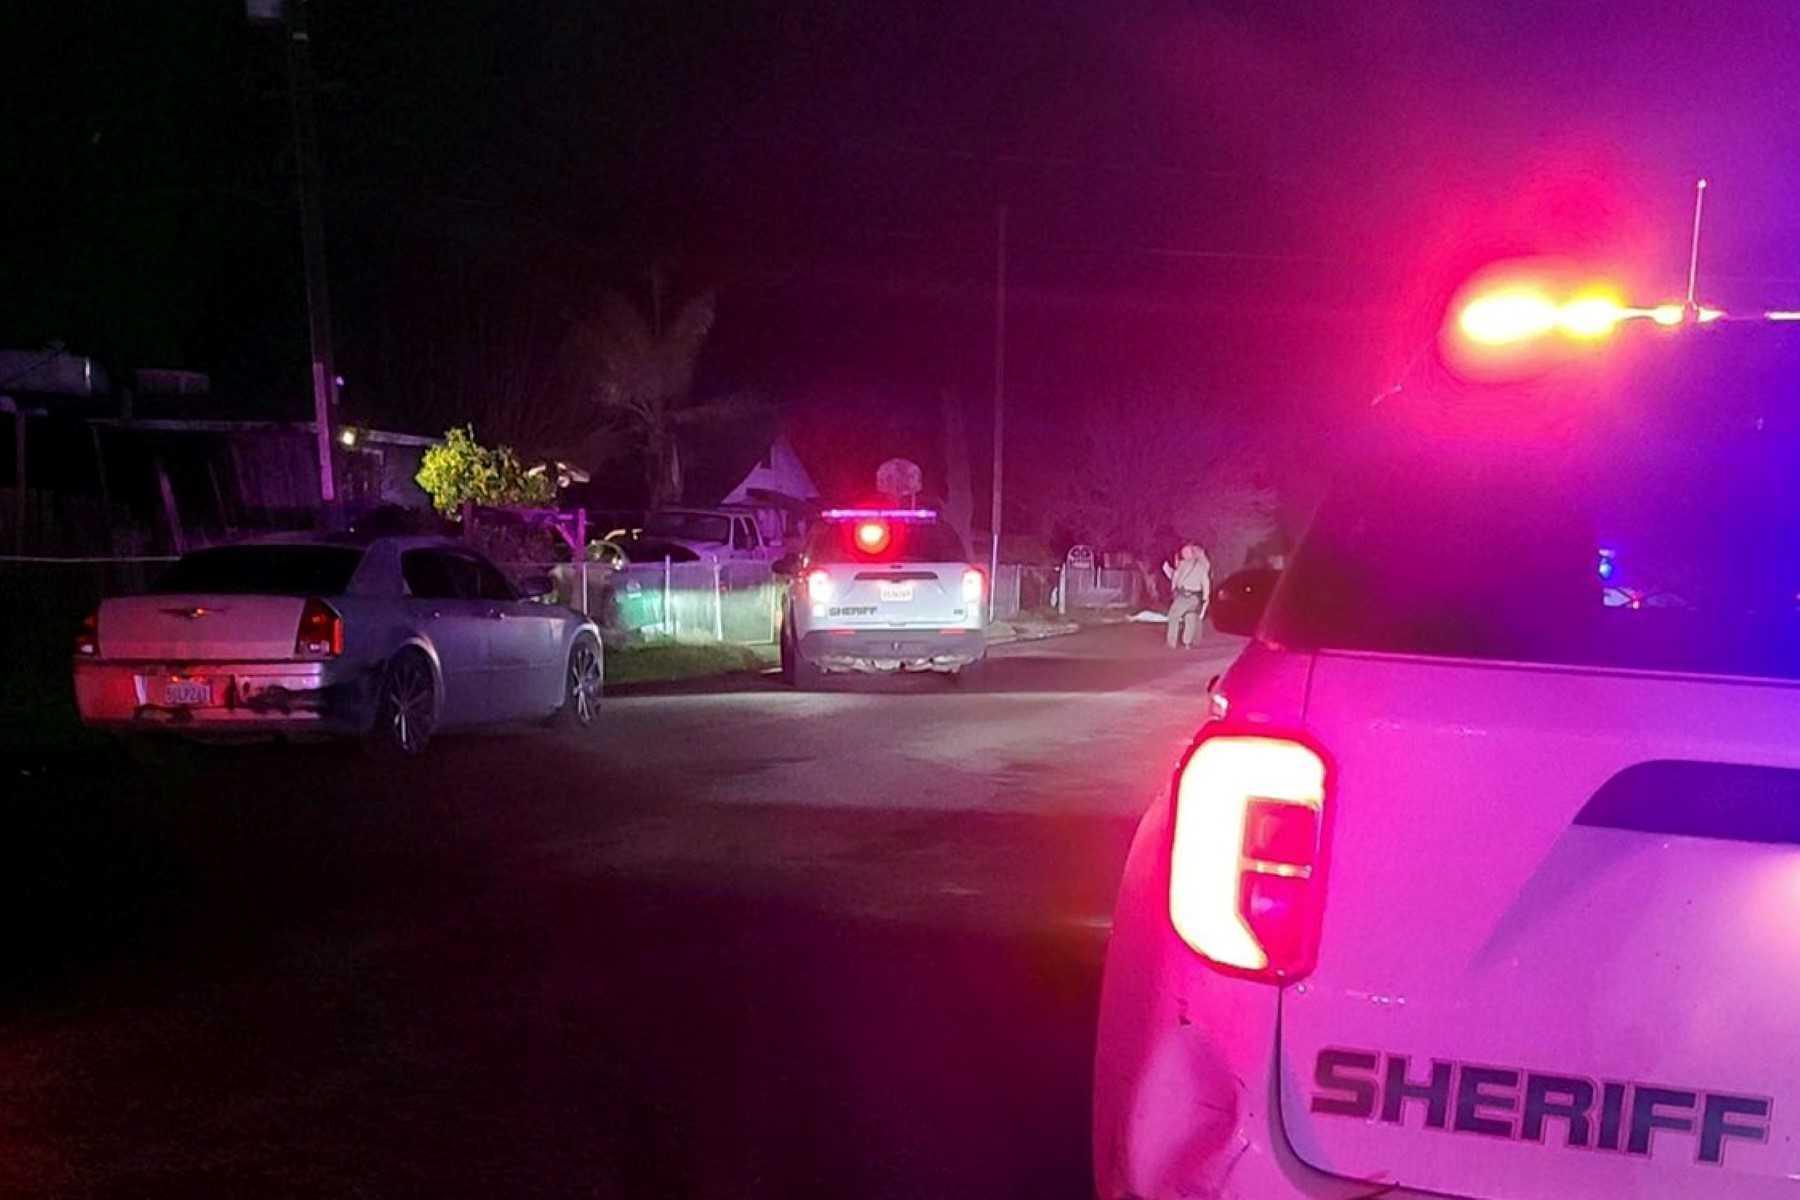 This handout image published by the Tulare County Sheriff's office on their Twitter account on Jan 16, shows police at the scene of a shooting in Tulare, California. Photo: AFP 